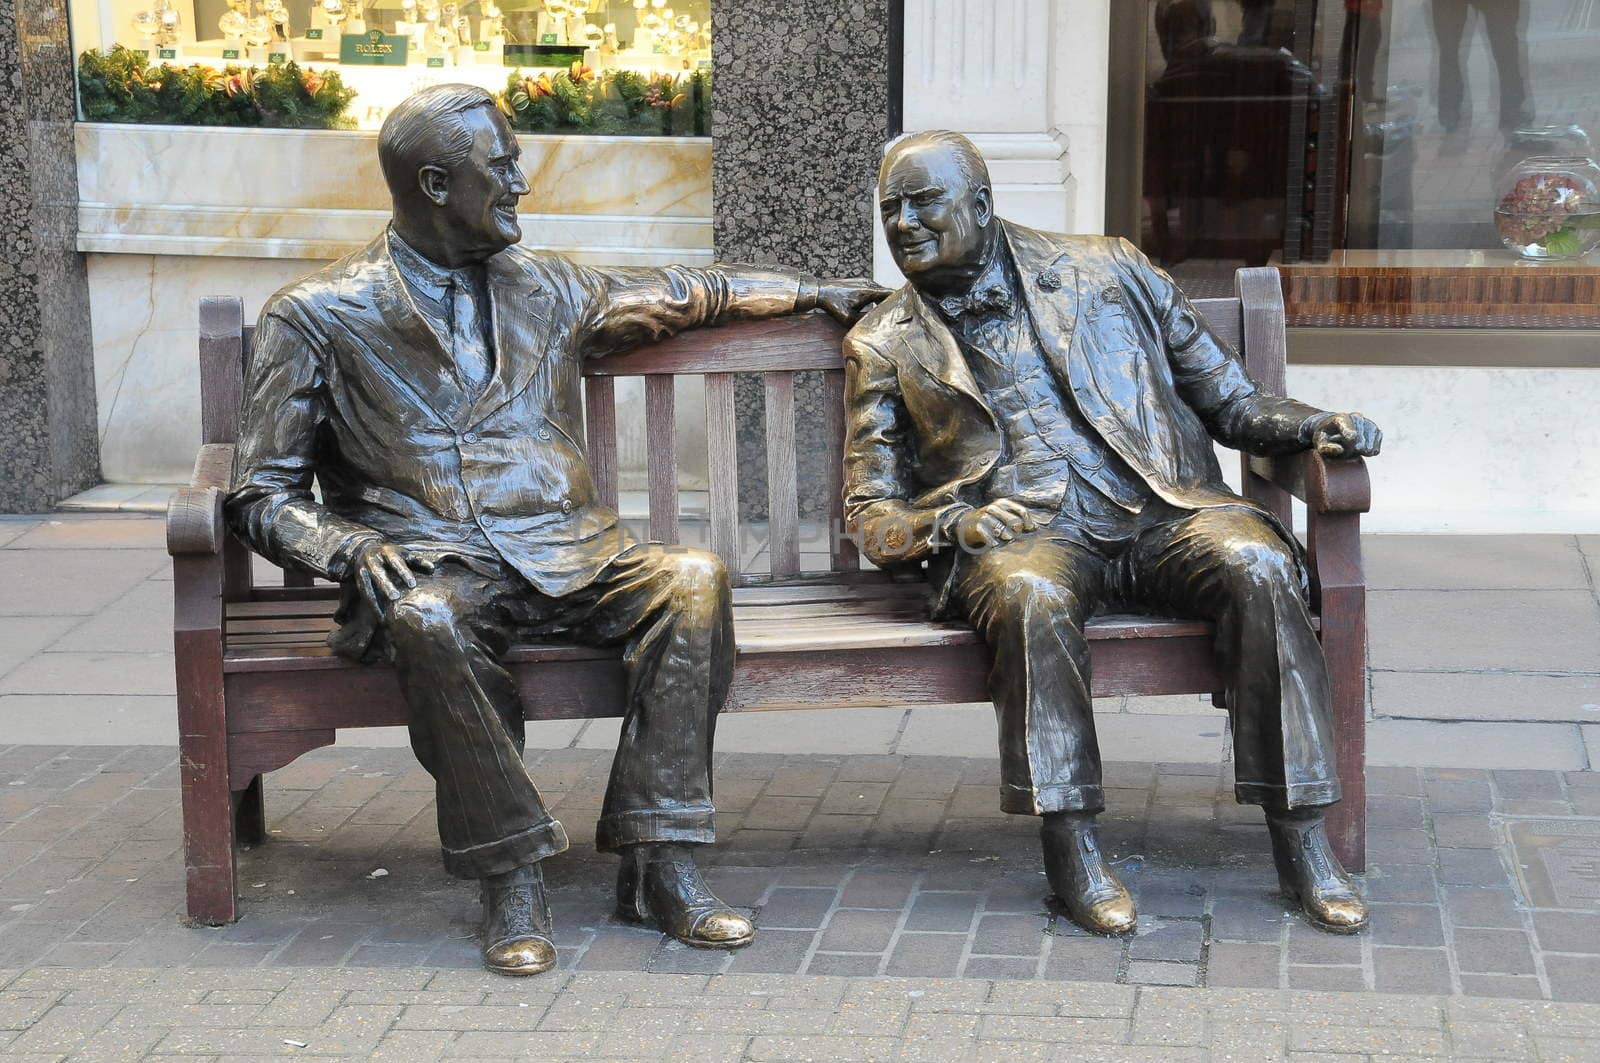 London statue of Churchill and Roosevelt talking